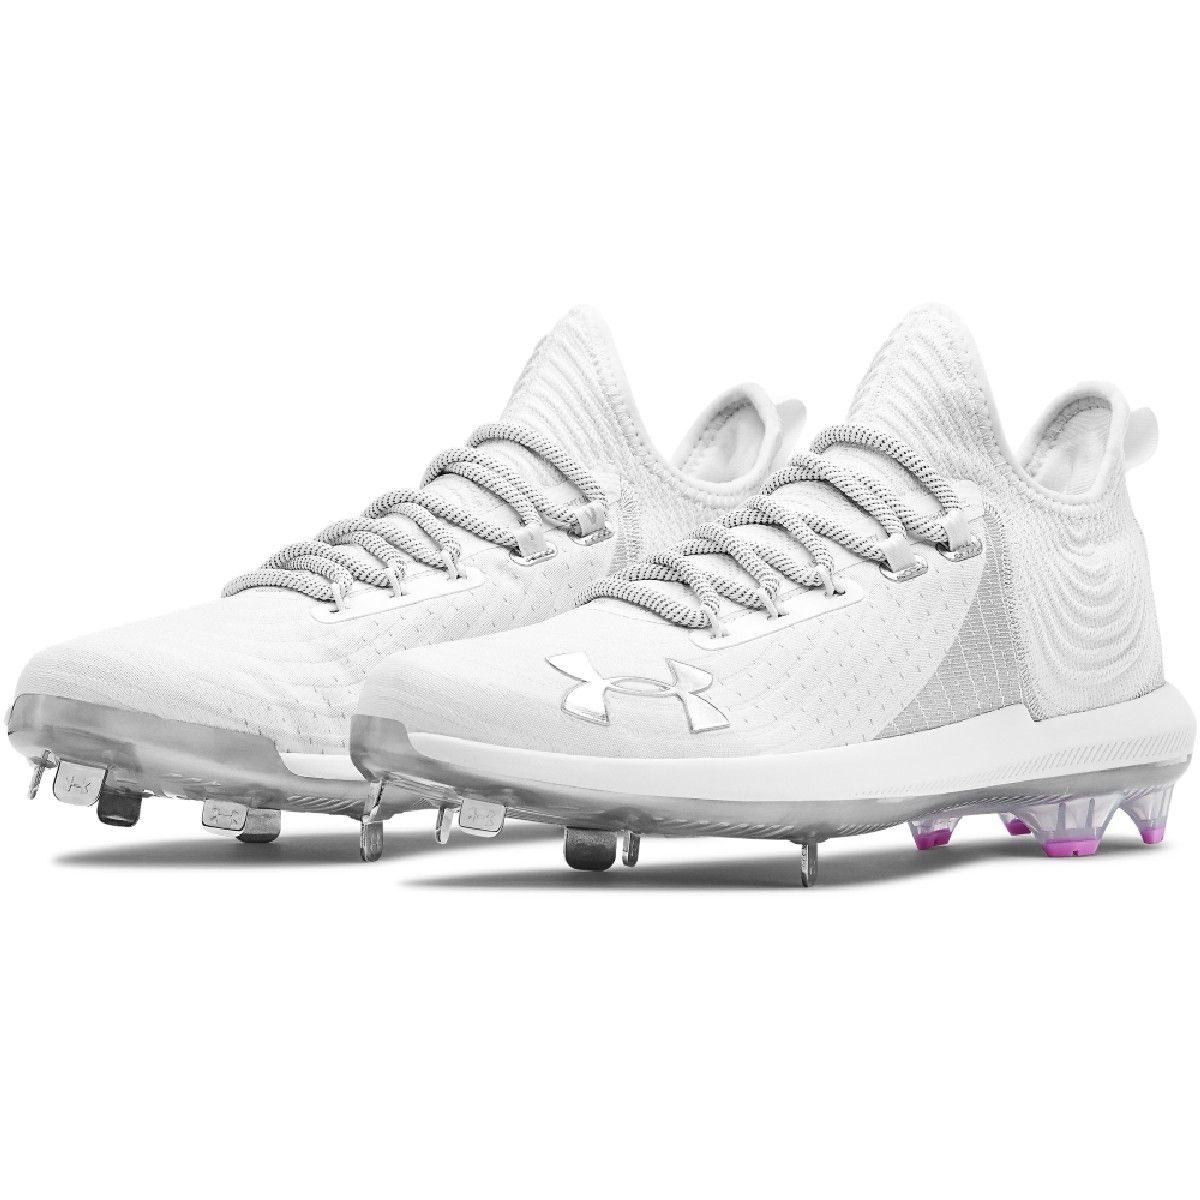 Under Armour Bryce Harper 4 Low Men's Metal Baseball Cleats (White